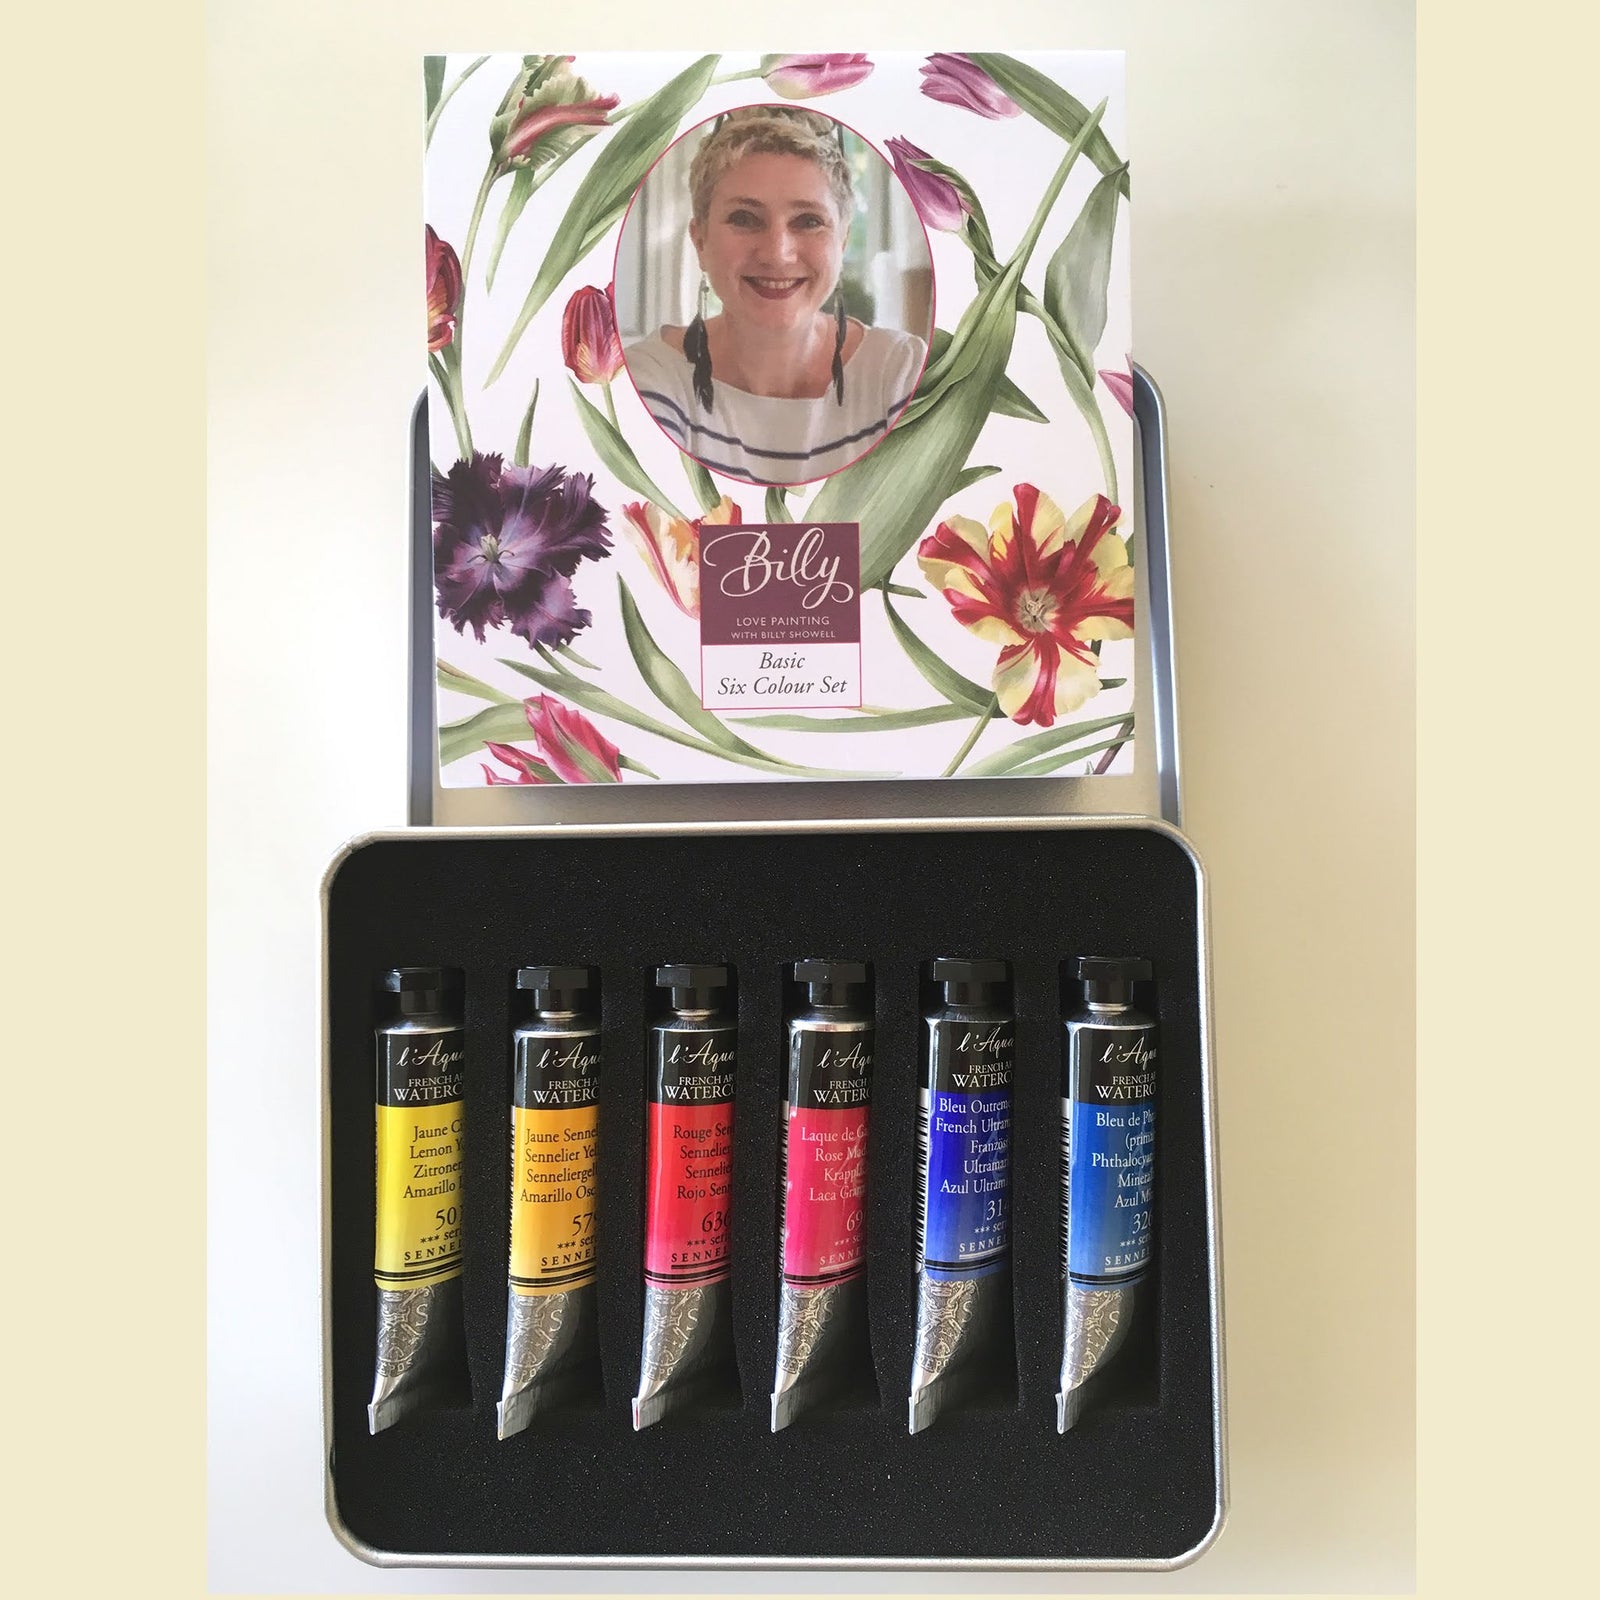 Billy Showell : Sennelier Watercolor Paint : 10ml : Basic Color Set of 6